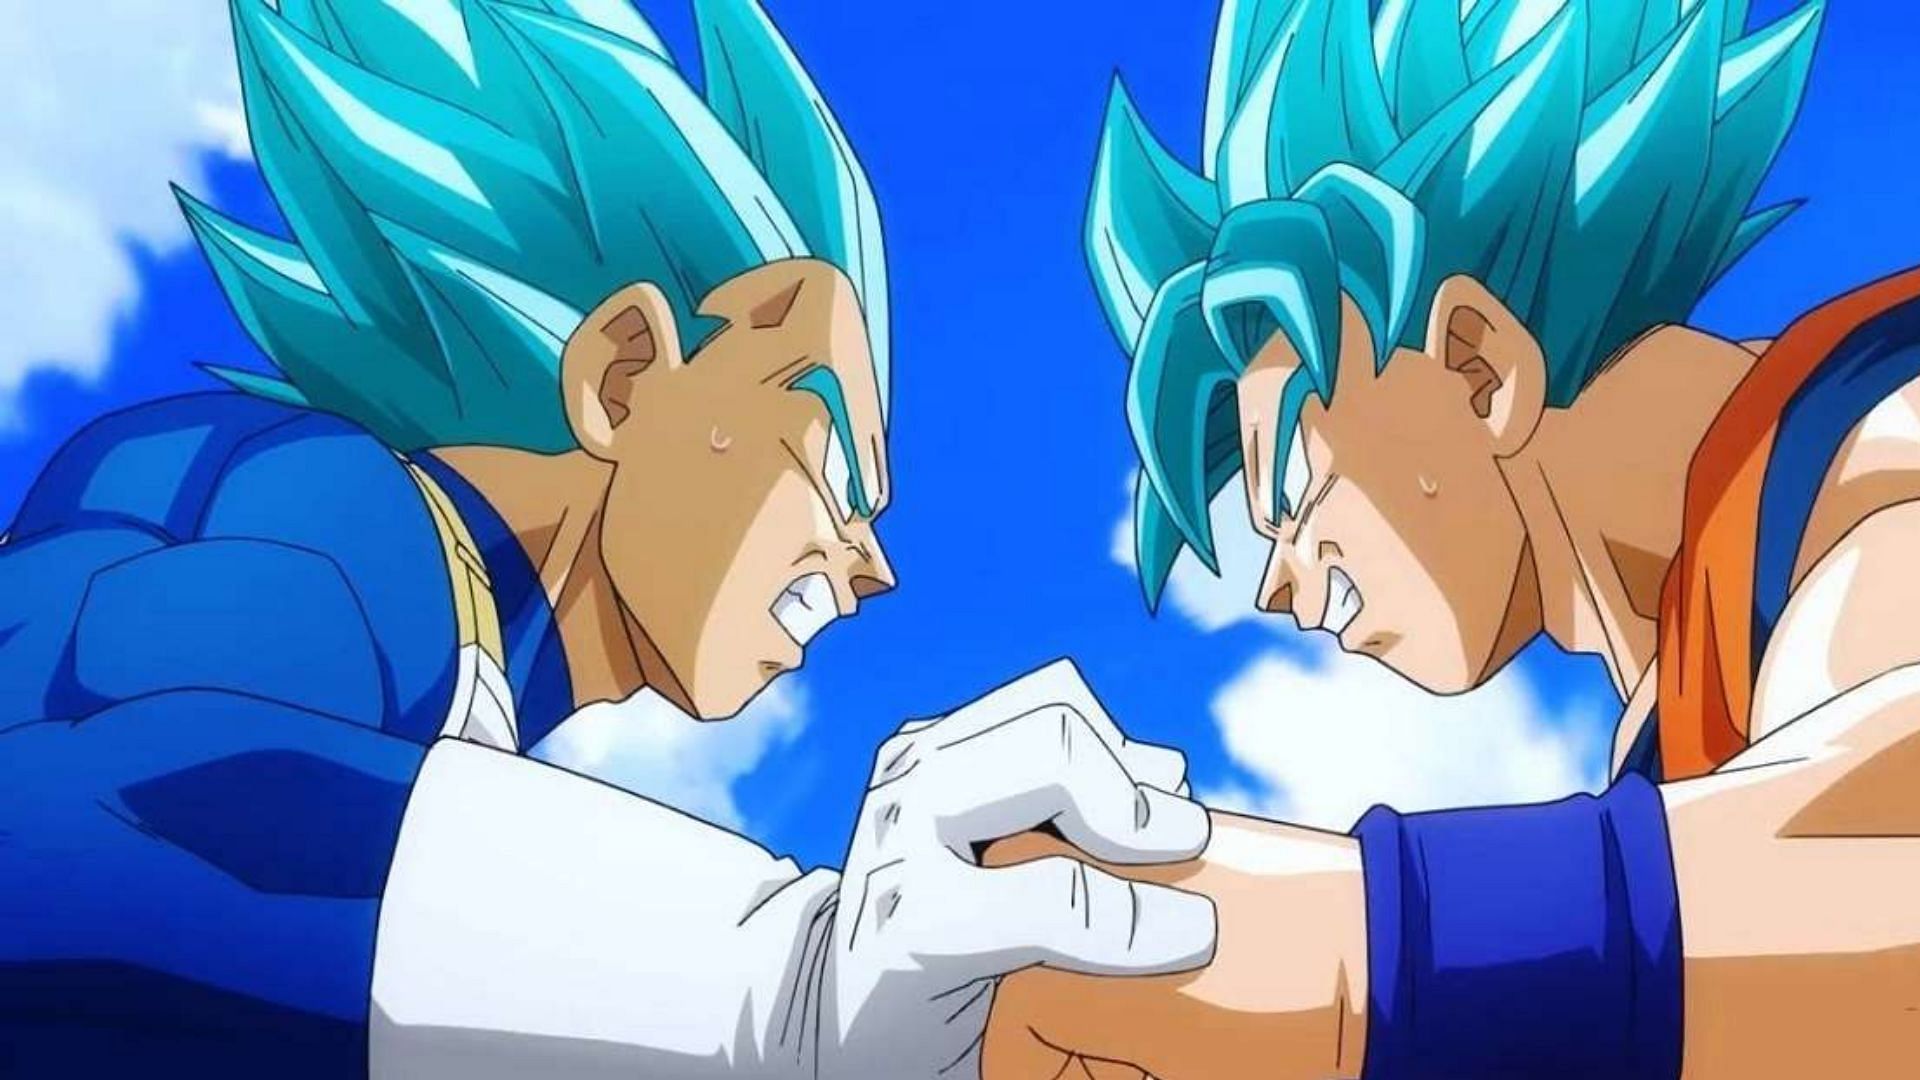 Undisputedly one of the most famous anime rivalries of all time (Image via Toei Animation)